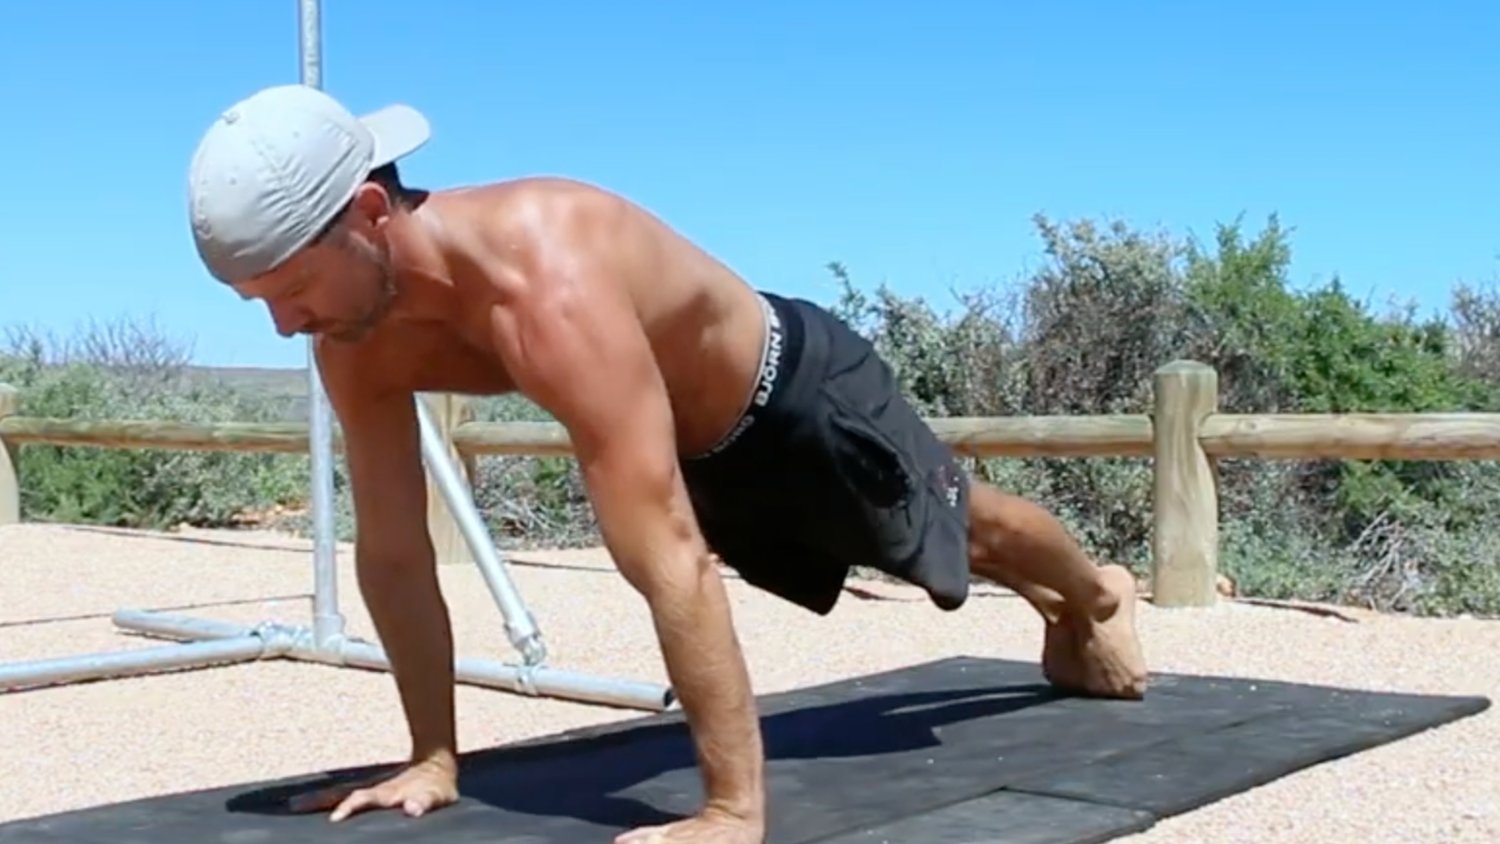 This Is Why You Aren't Getting Better at Push-Ups